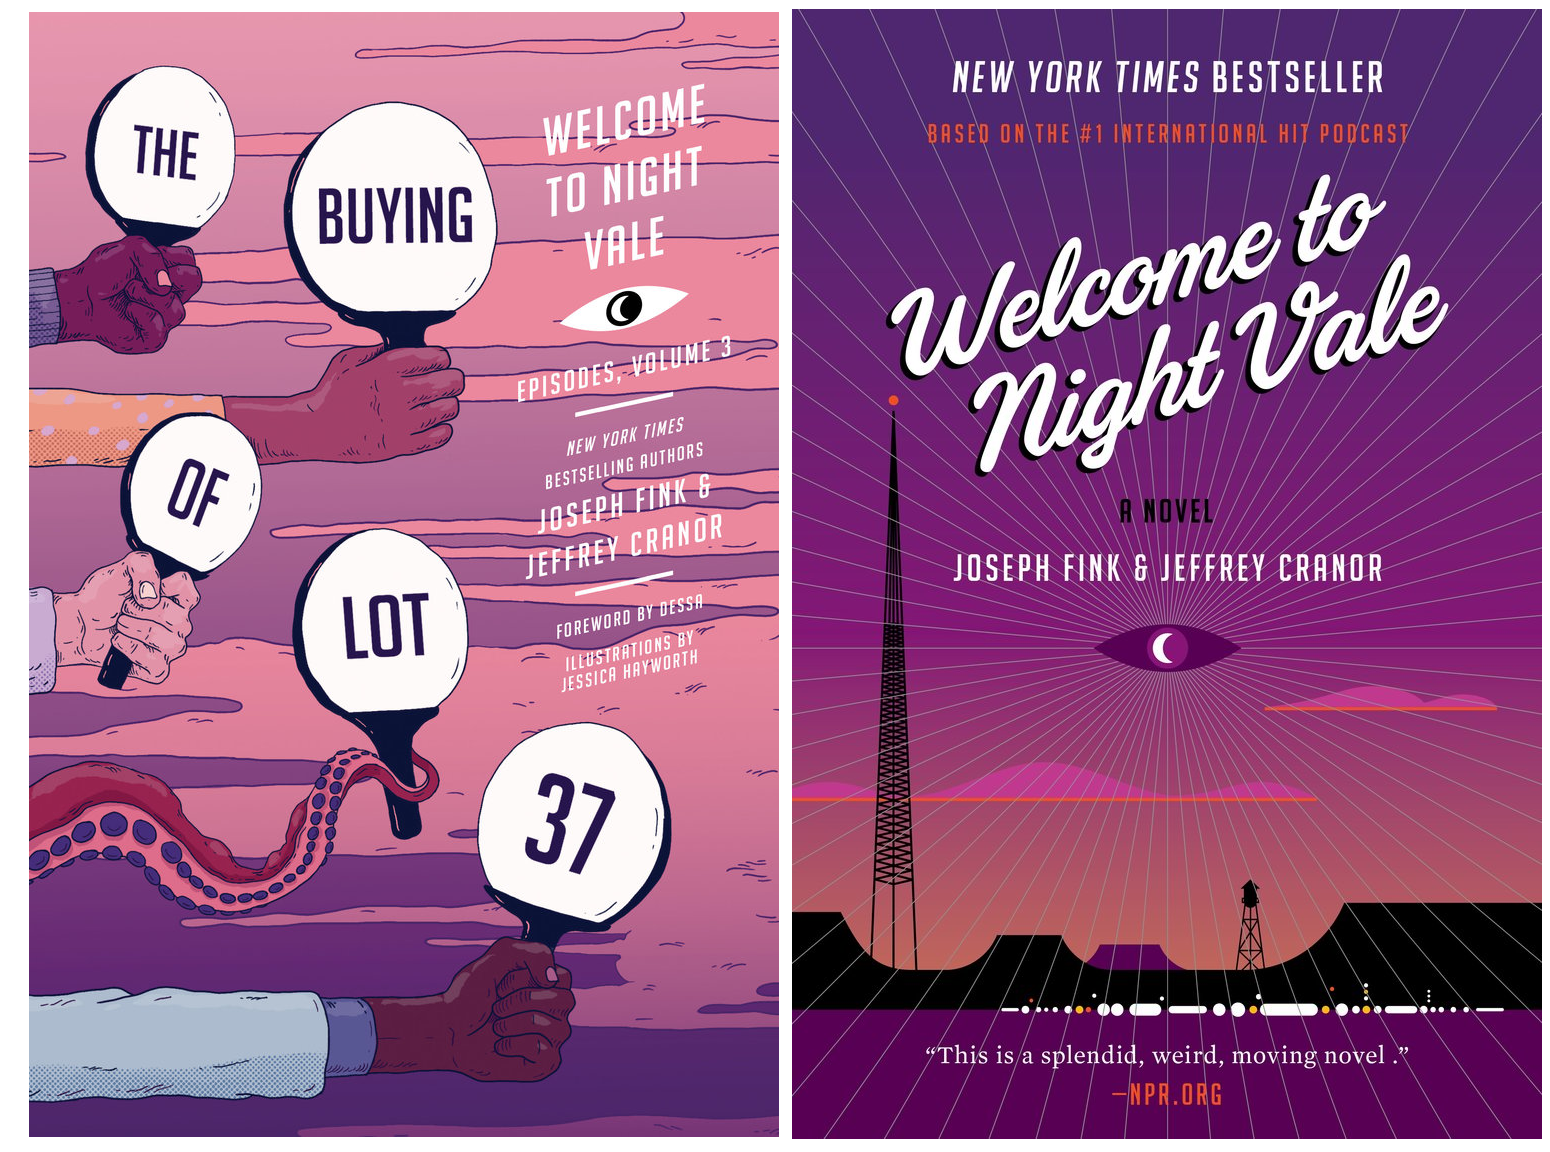 The front covers for two Night Vale, "Welcome to Night Vale: A Novel" and the third volume of episode collections "The Buying of Lot 37". The novel art is the classic purple and dark pink with the eye in the sky, crescent moon as its pupil, in the very center, radiating thin white lines across the whole book like like. There is a tall signal tower in the foreground. The second book features a series of hands coming out from the left edge of the image each holding ping-pong paddles that have each word of the title in them. One of the hands is a tentacle. The background is again purple and pink, and it looks like clouds in the sky, or possibly a strange oil spill. 